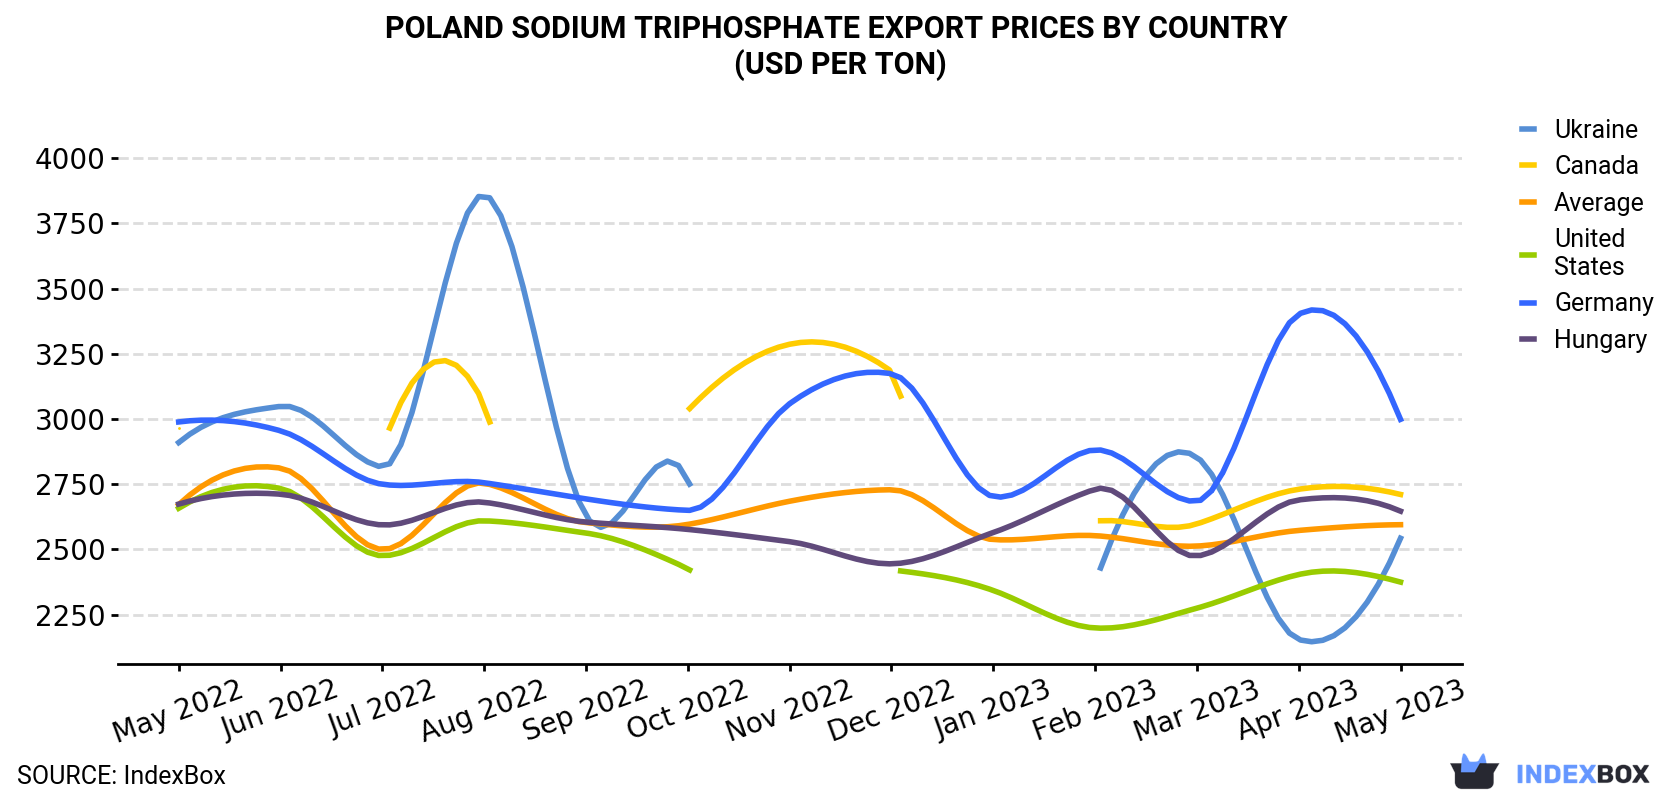 Poland Sodium Triphosphate Export Prices By Country (USD Per Ton)